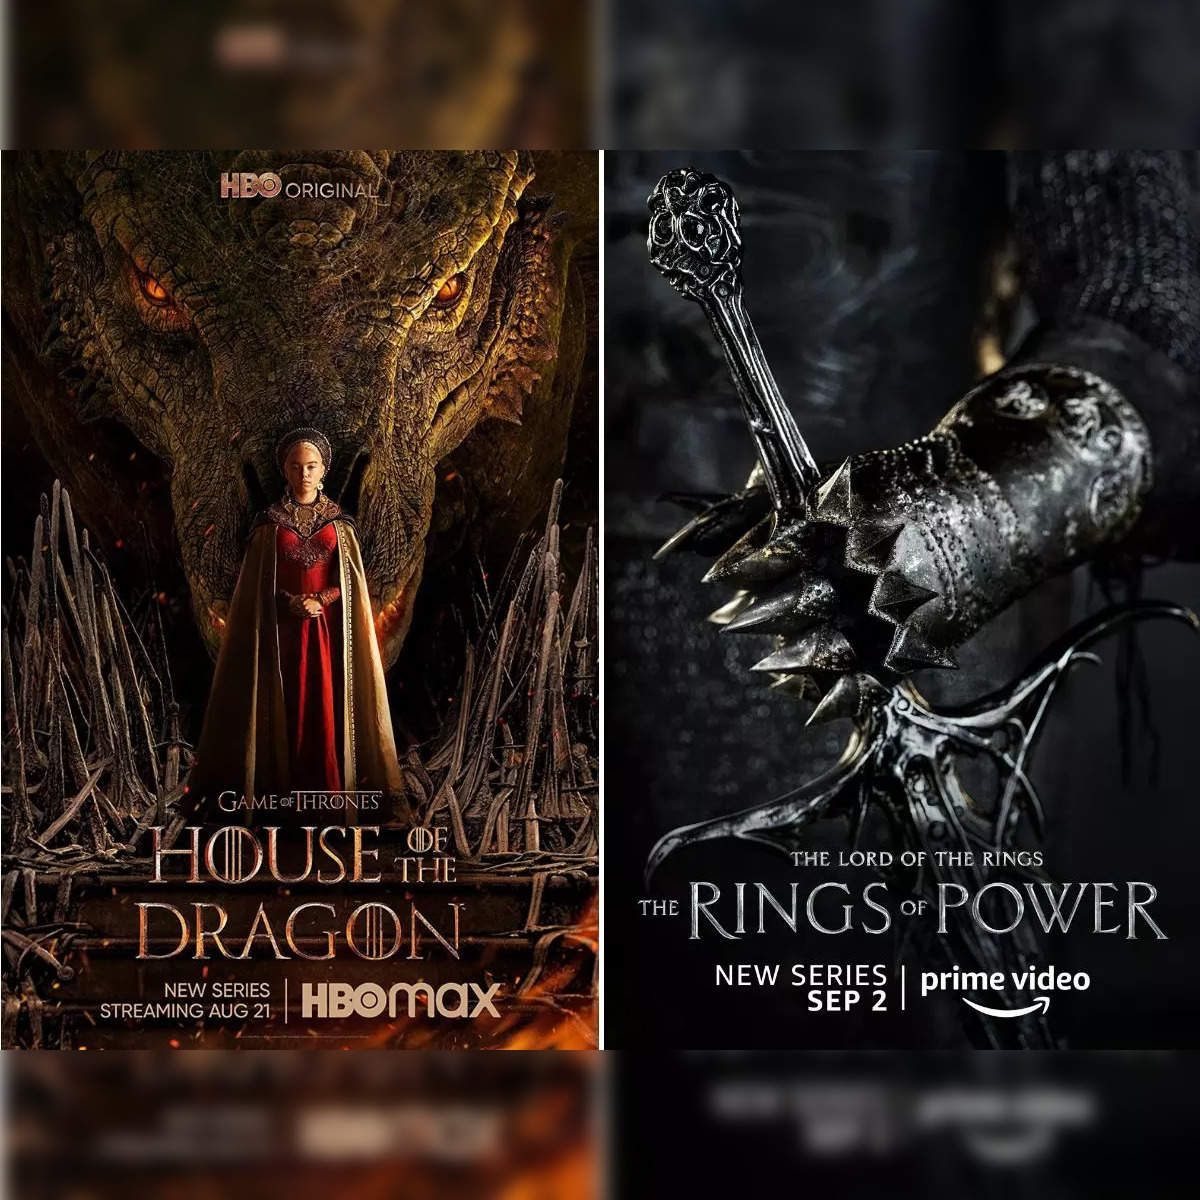 House of the Dragon to Rings of Power: Web shows and movies based